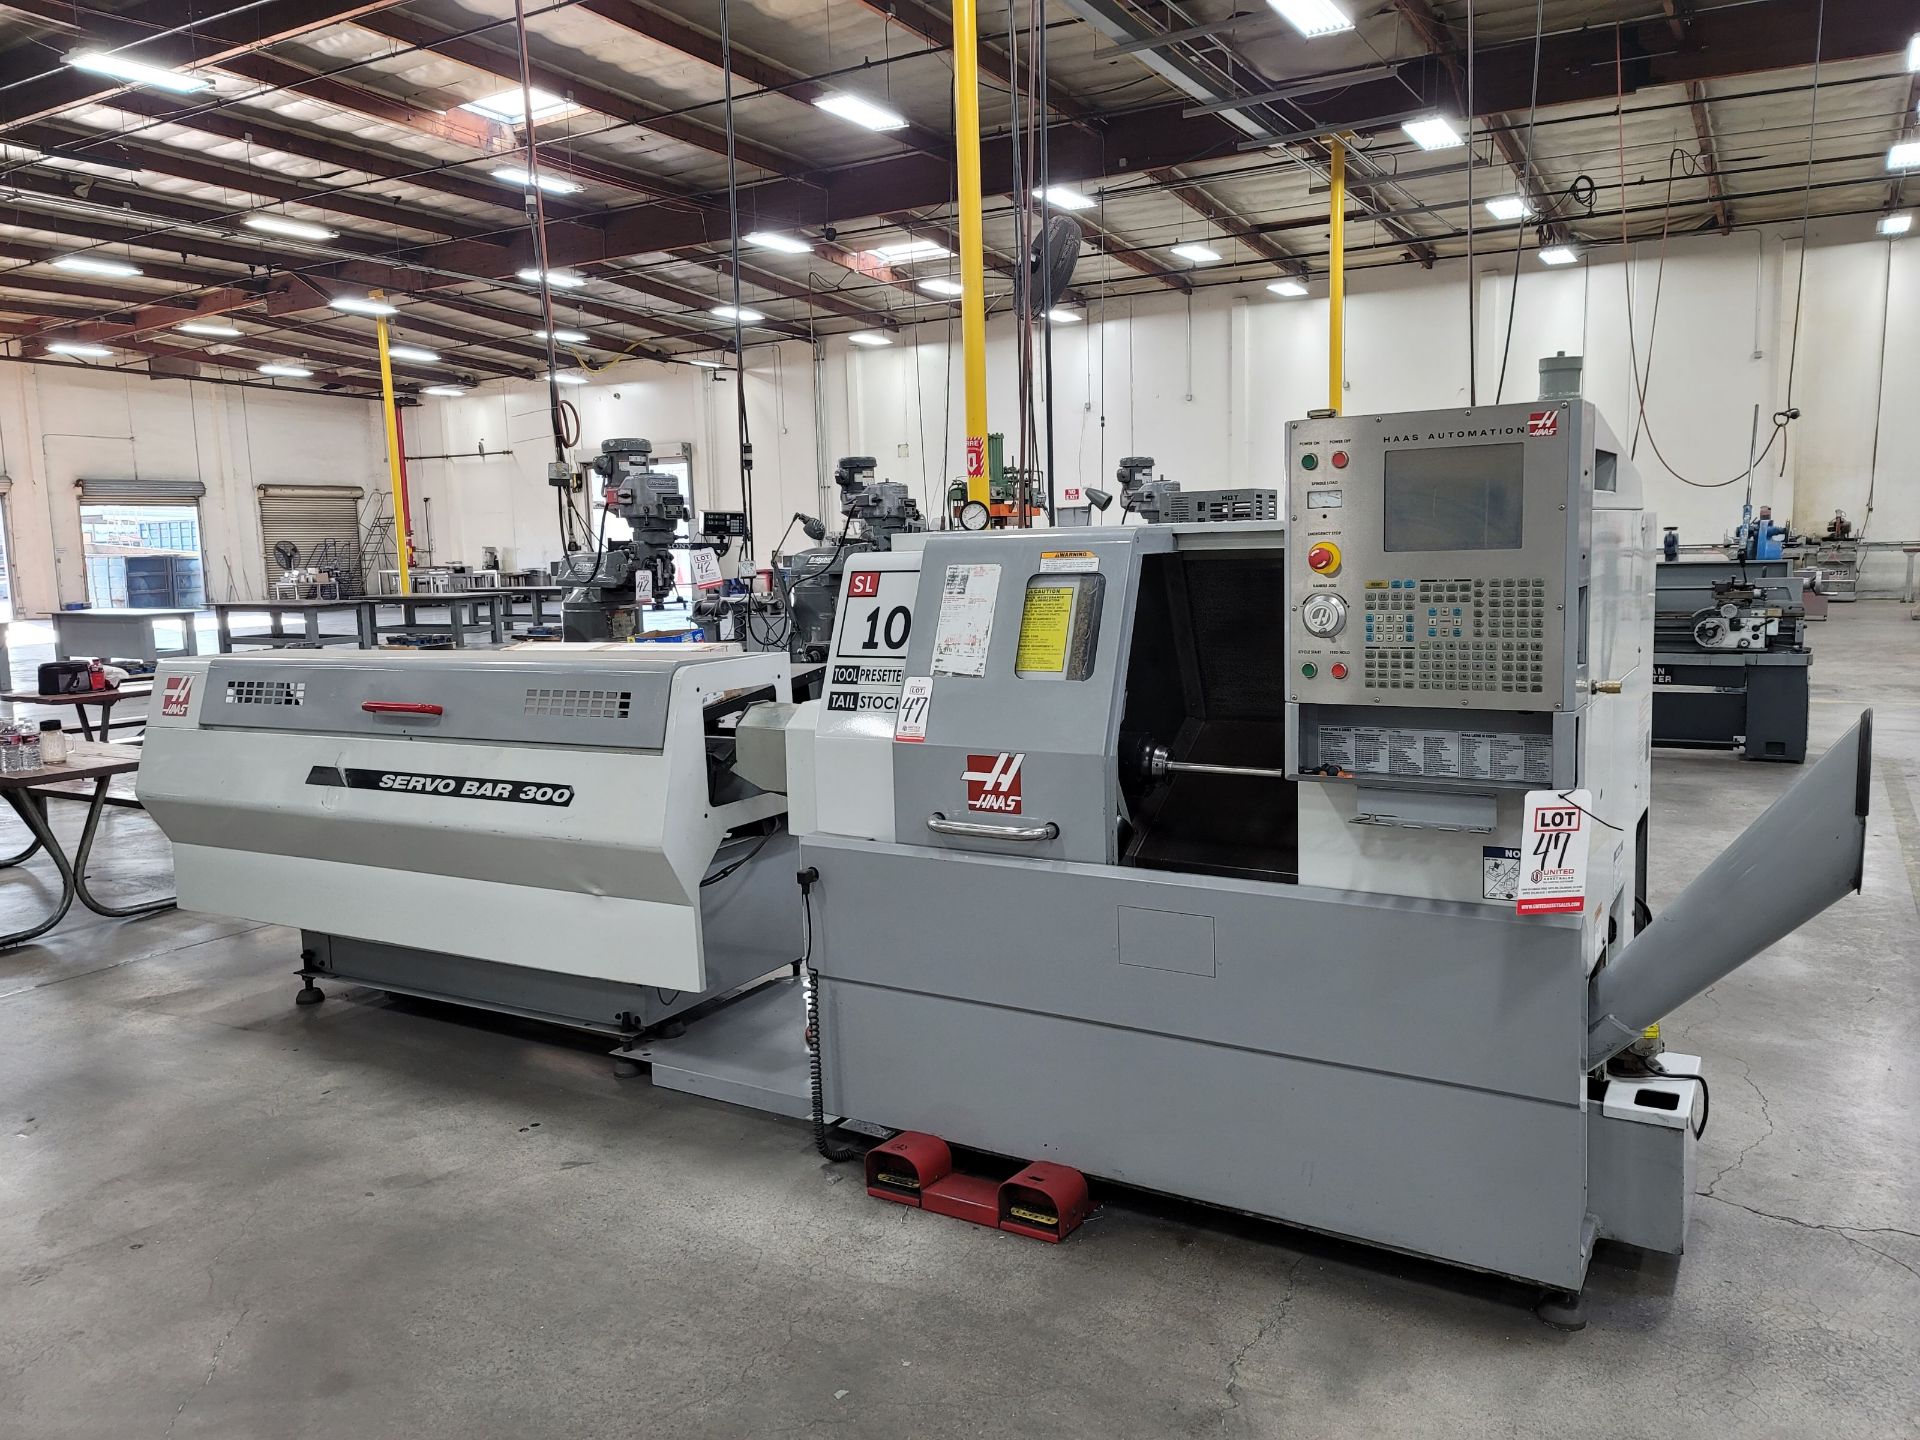 2006 HAAS SL-10T TURNING CENTER, SPINDLE HOURS: 2,109, SERVO ON TIME: 7,600 HOURS, MAXIMUM TURNING